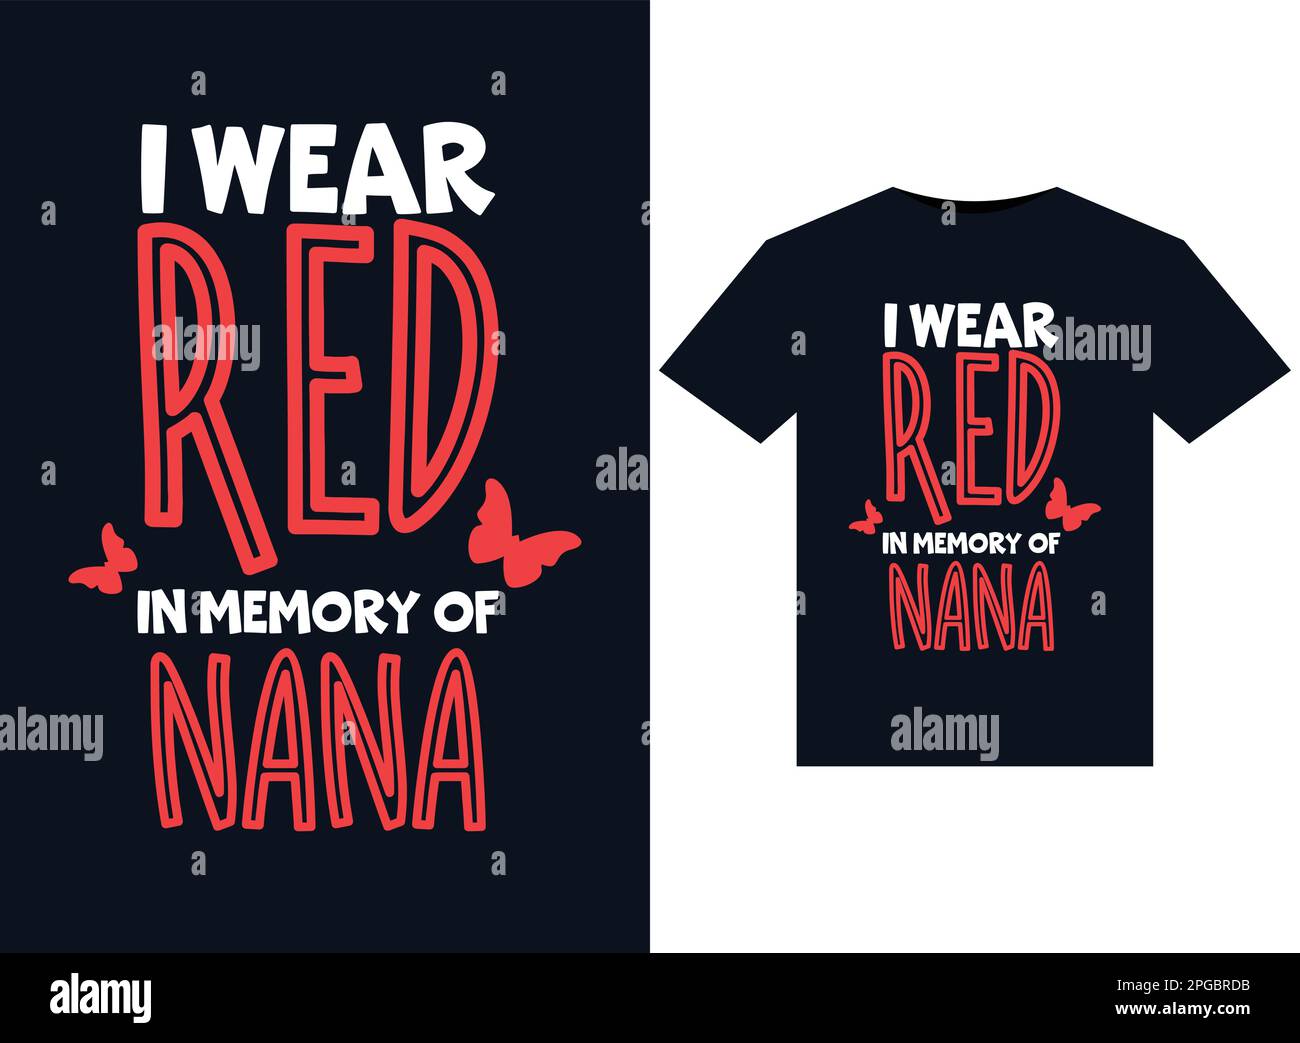 I Wear Red In Memory of Nana illustrations for print-ready T-Shirts design Stock Vector